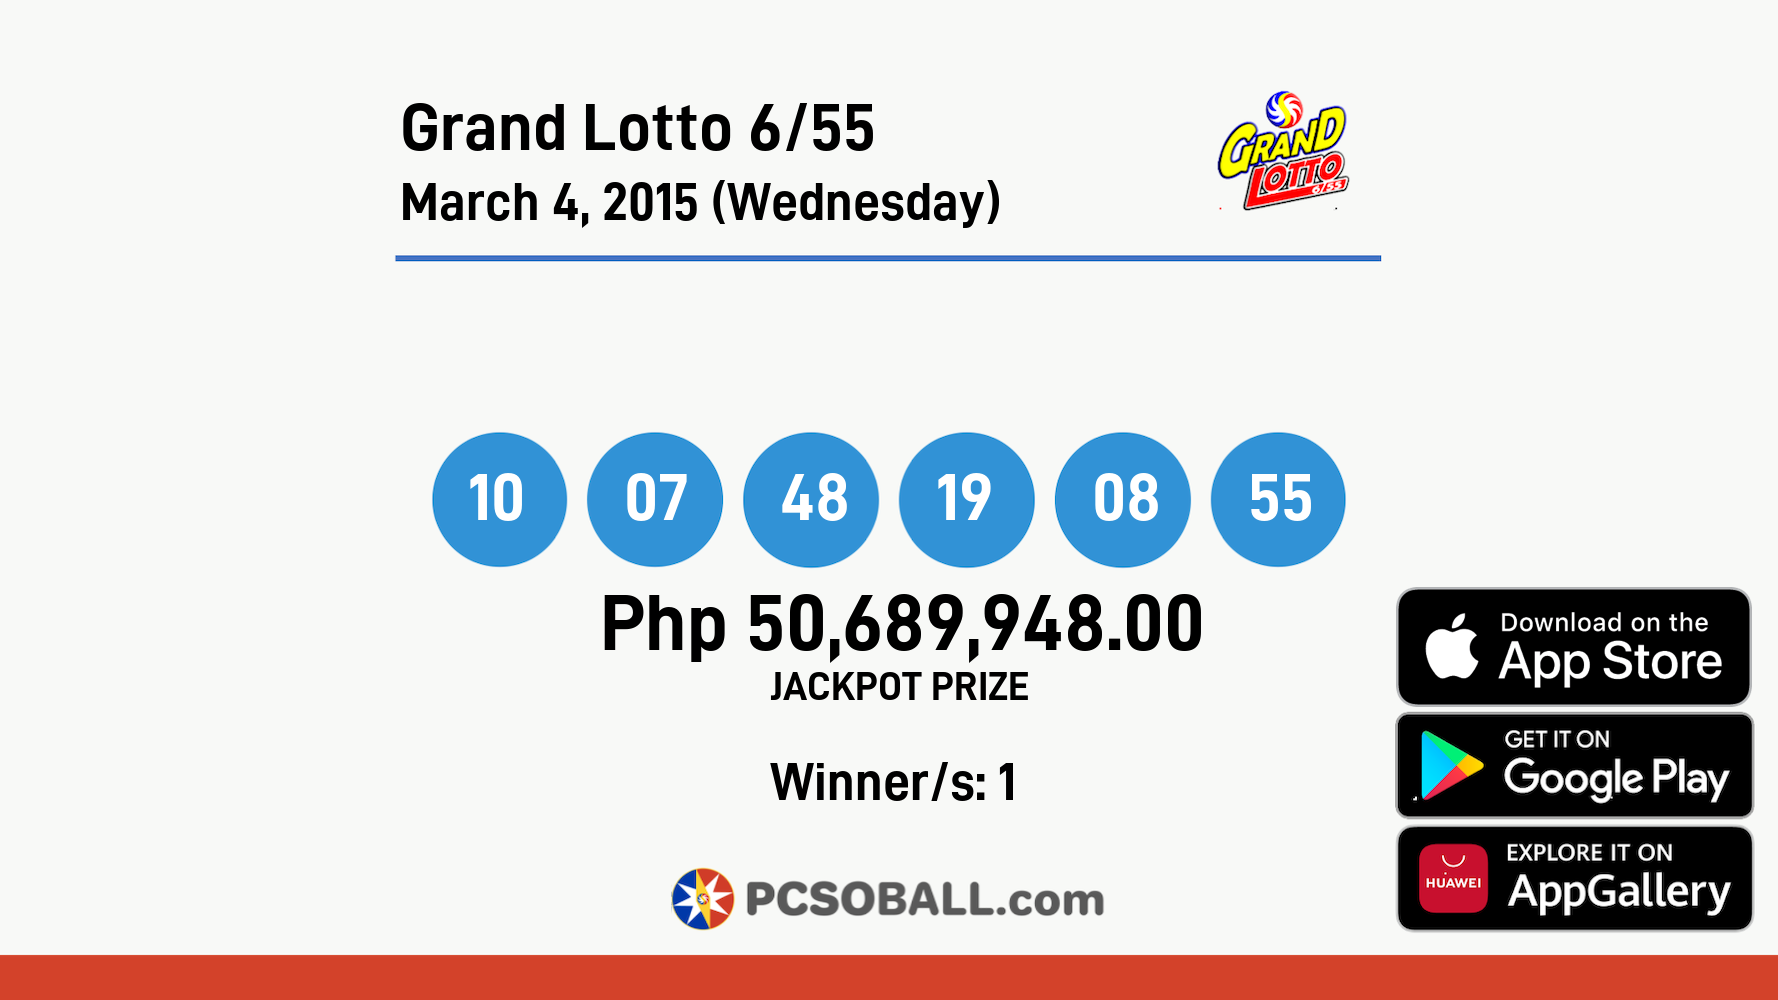 Grand Lotto 6/55 March 4, 2015 (Wednesday) Result